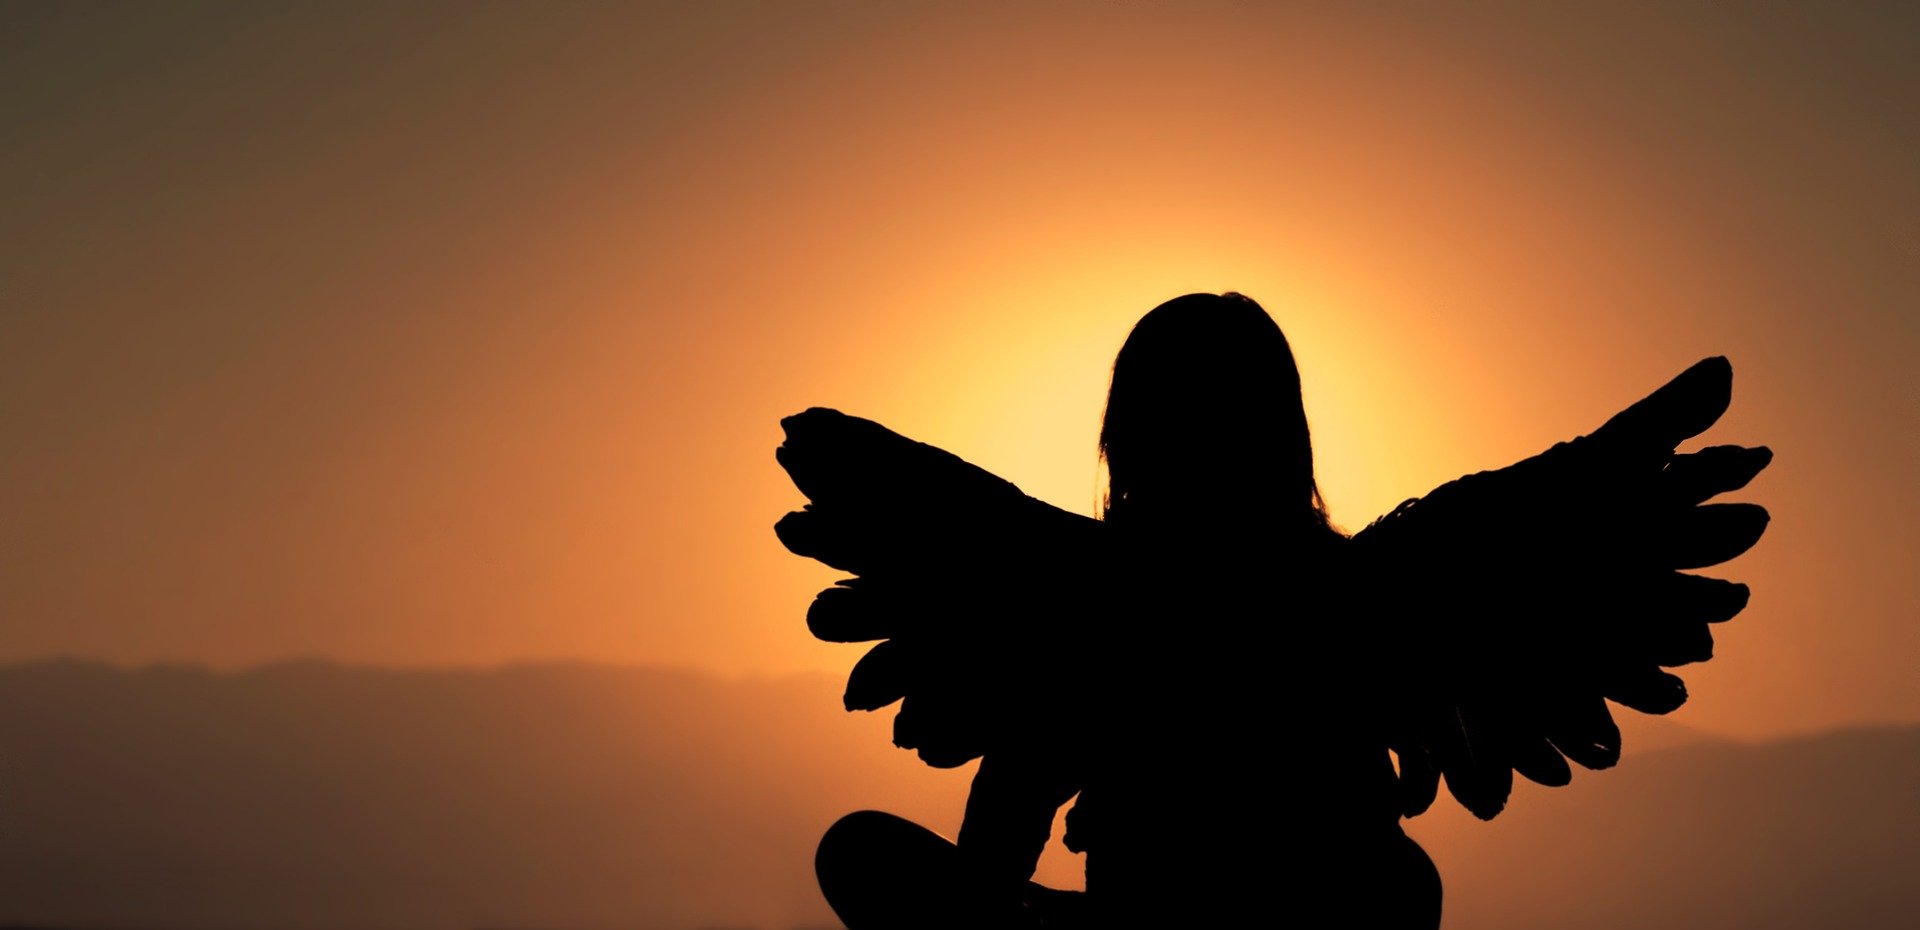 A person with wings sitting in front of the sun.